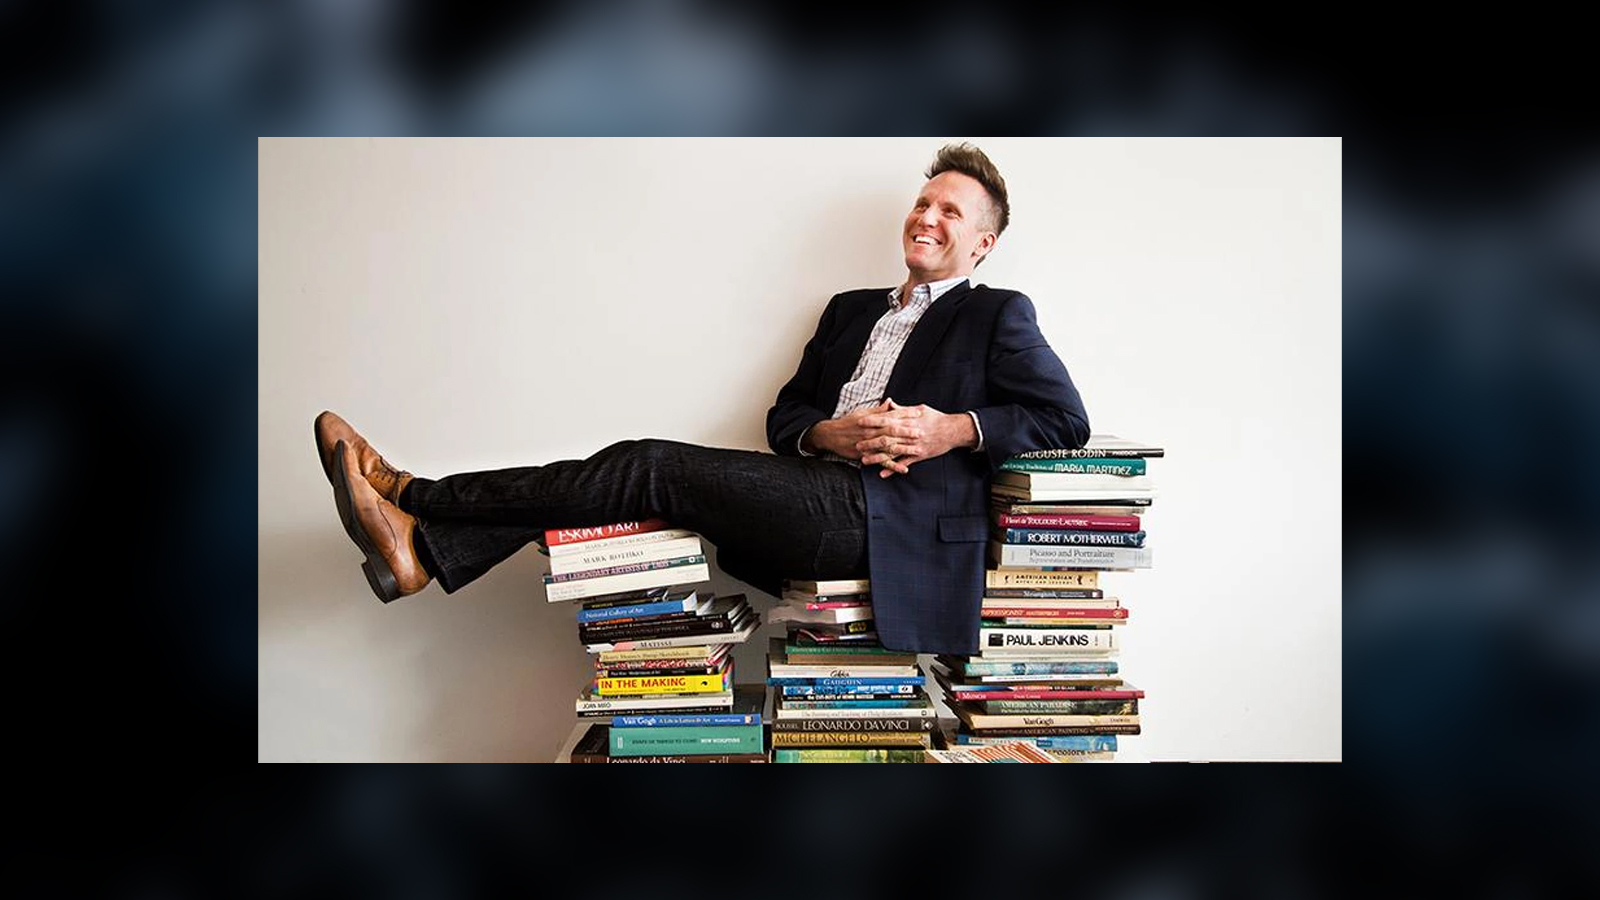 Image of Theo Edmonds reclining in a suit on a stack of books